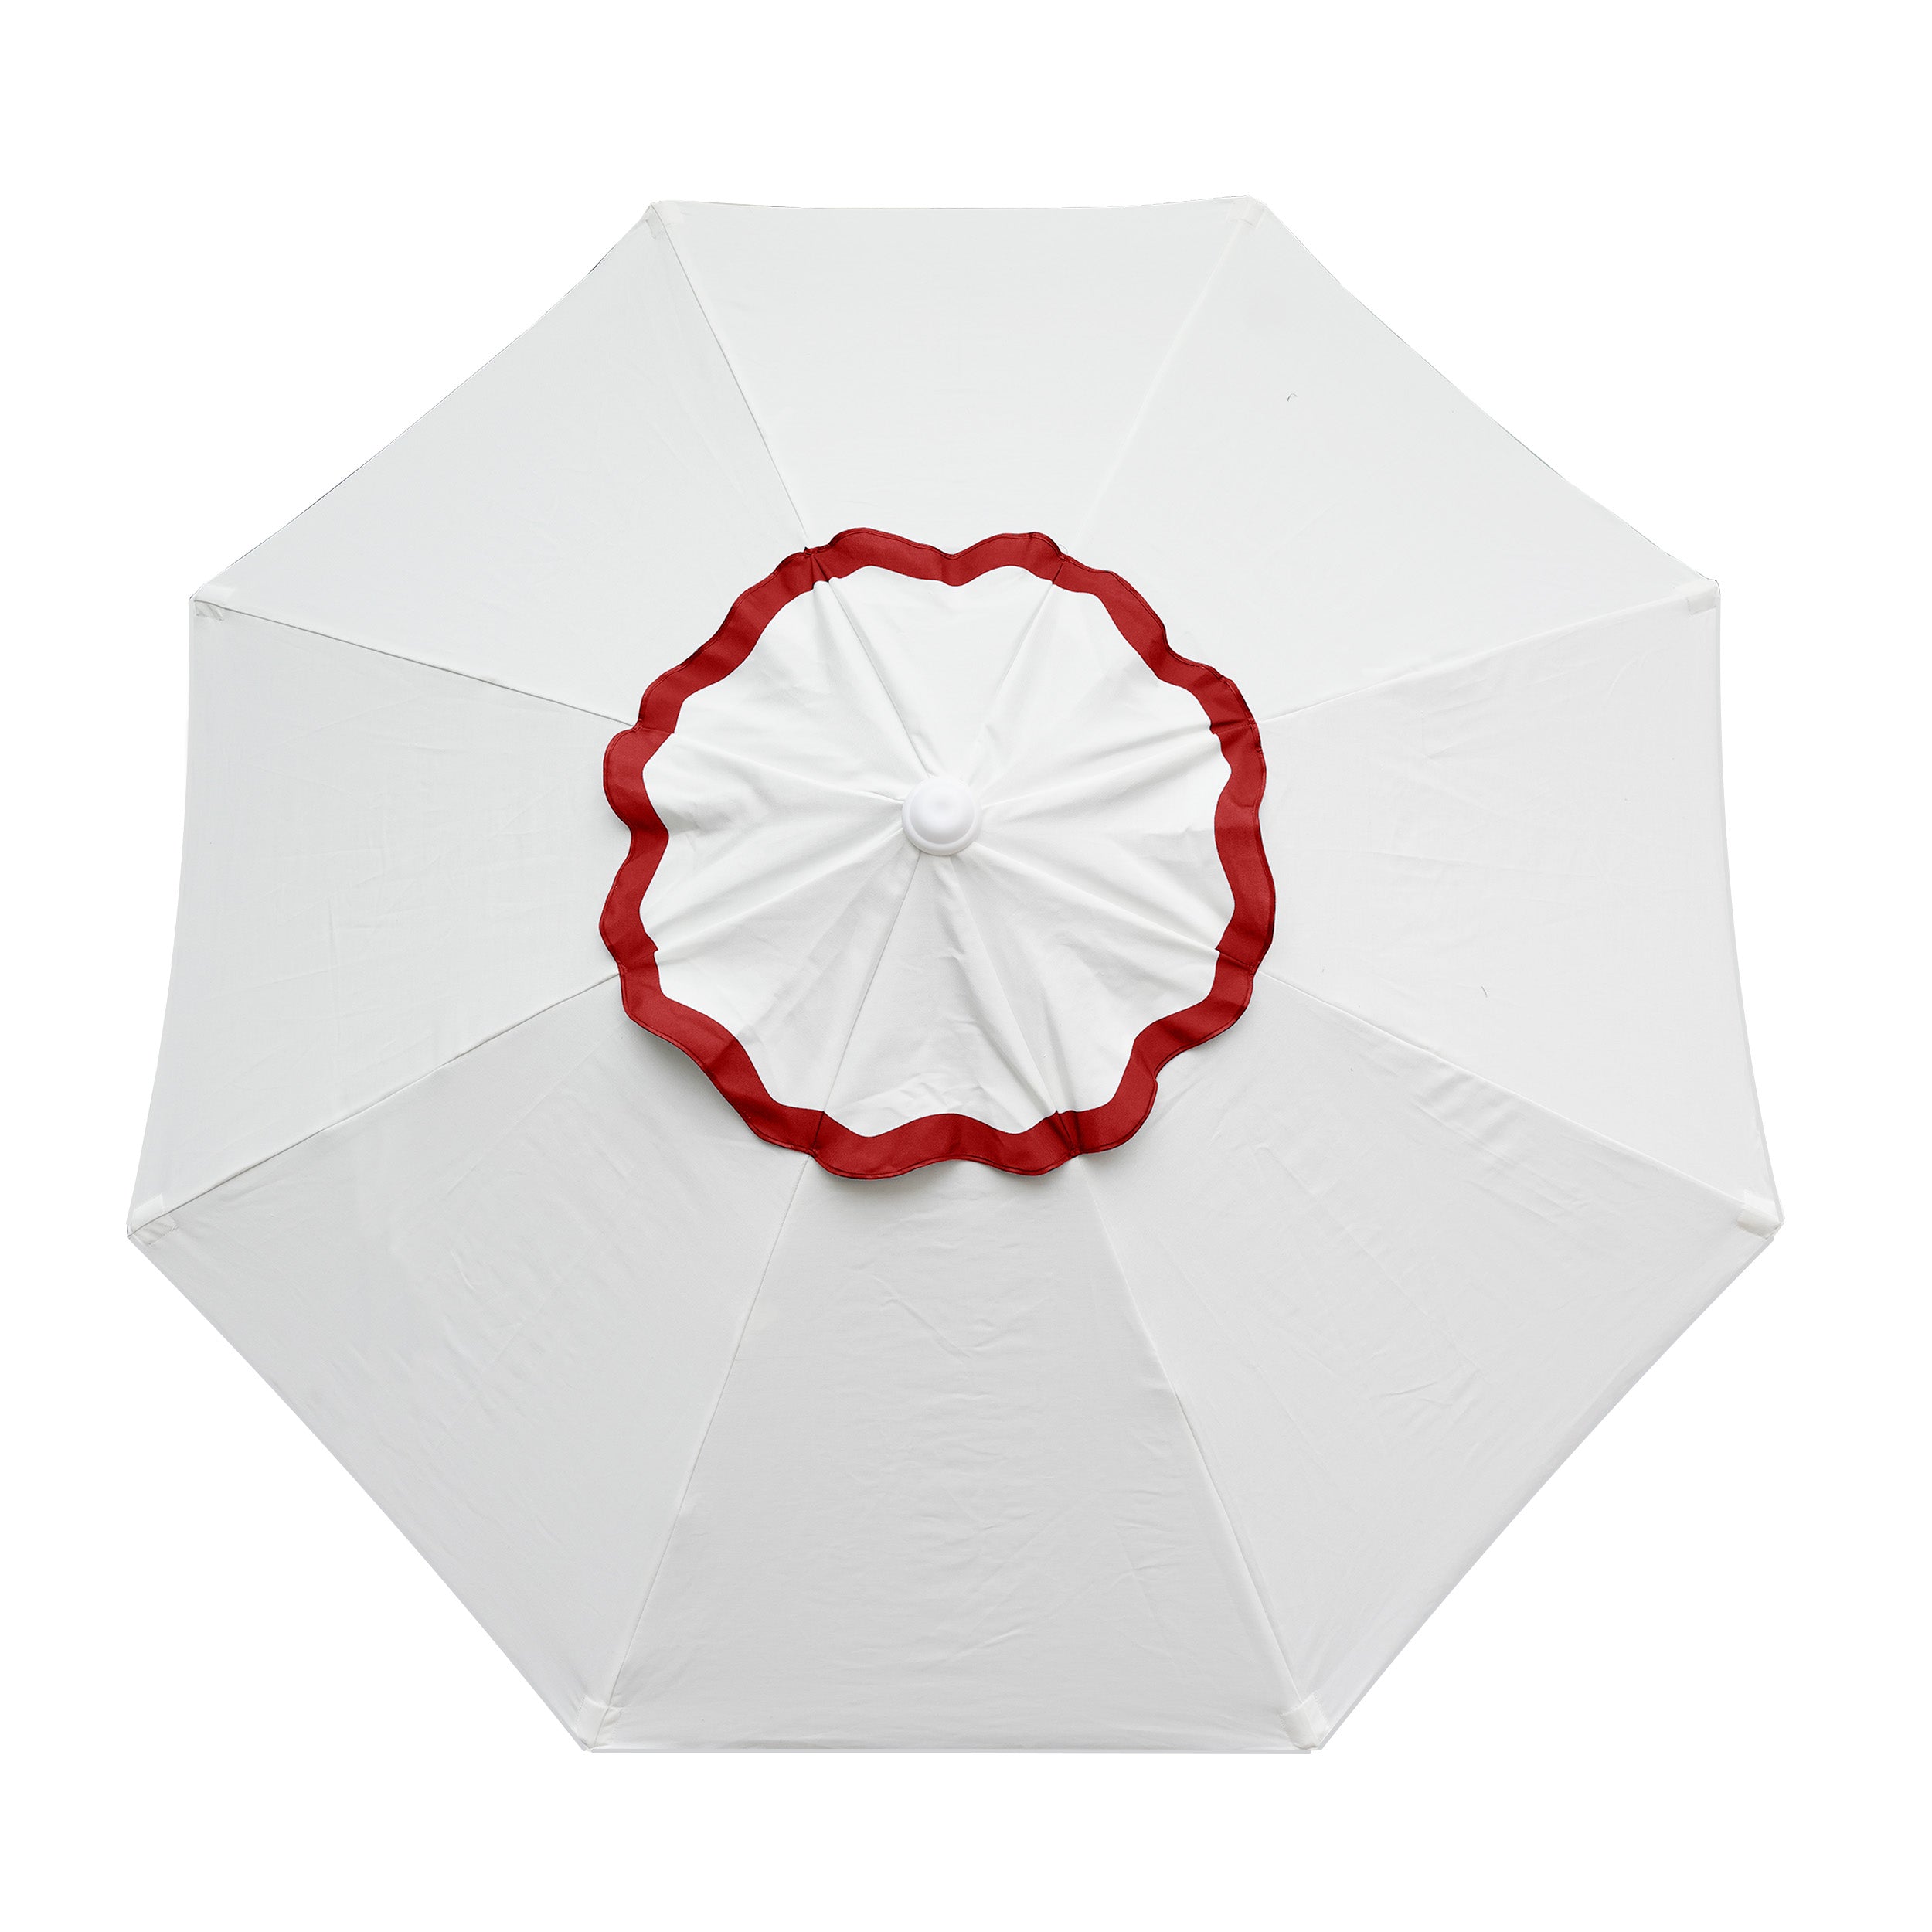 AMMSUN 7.8ft Beach & Patio Umbrella with red flaps white